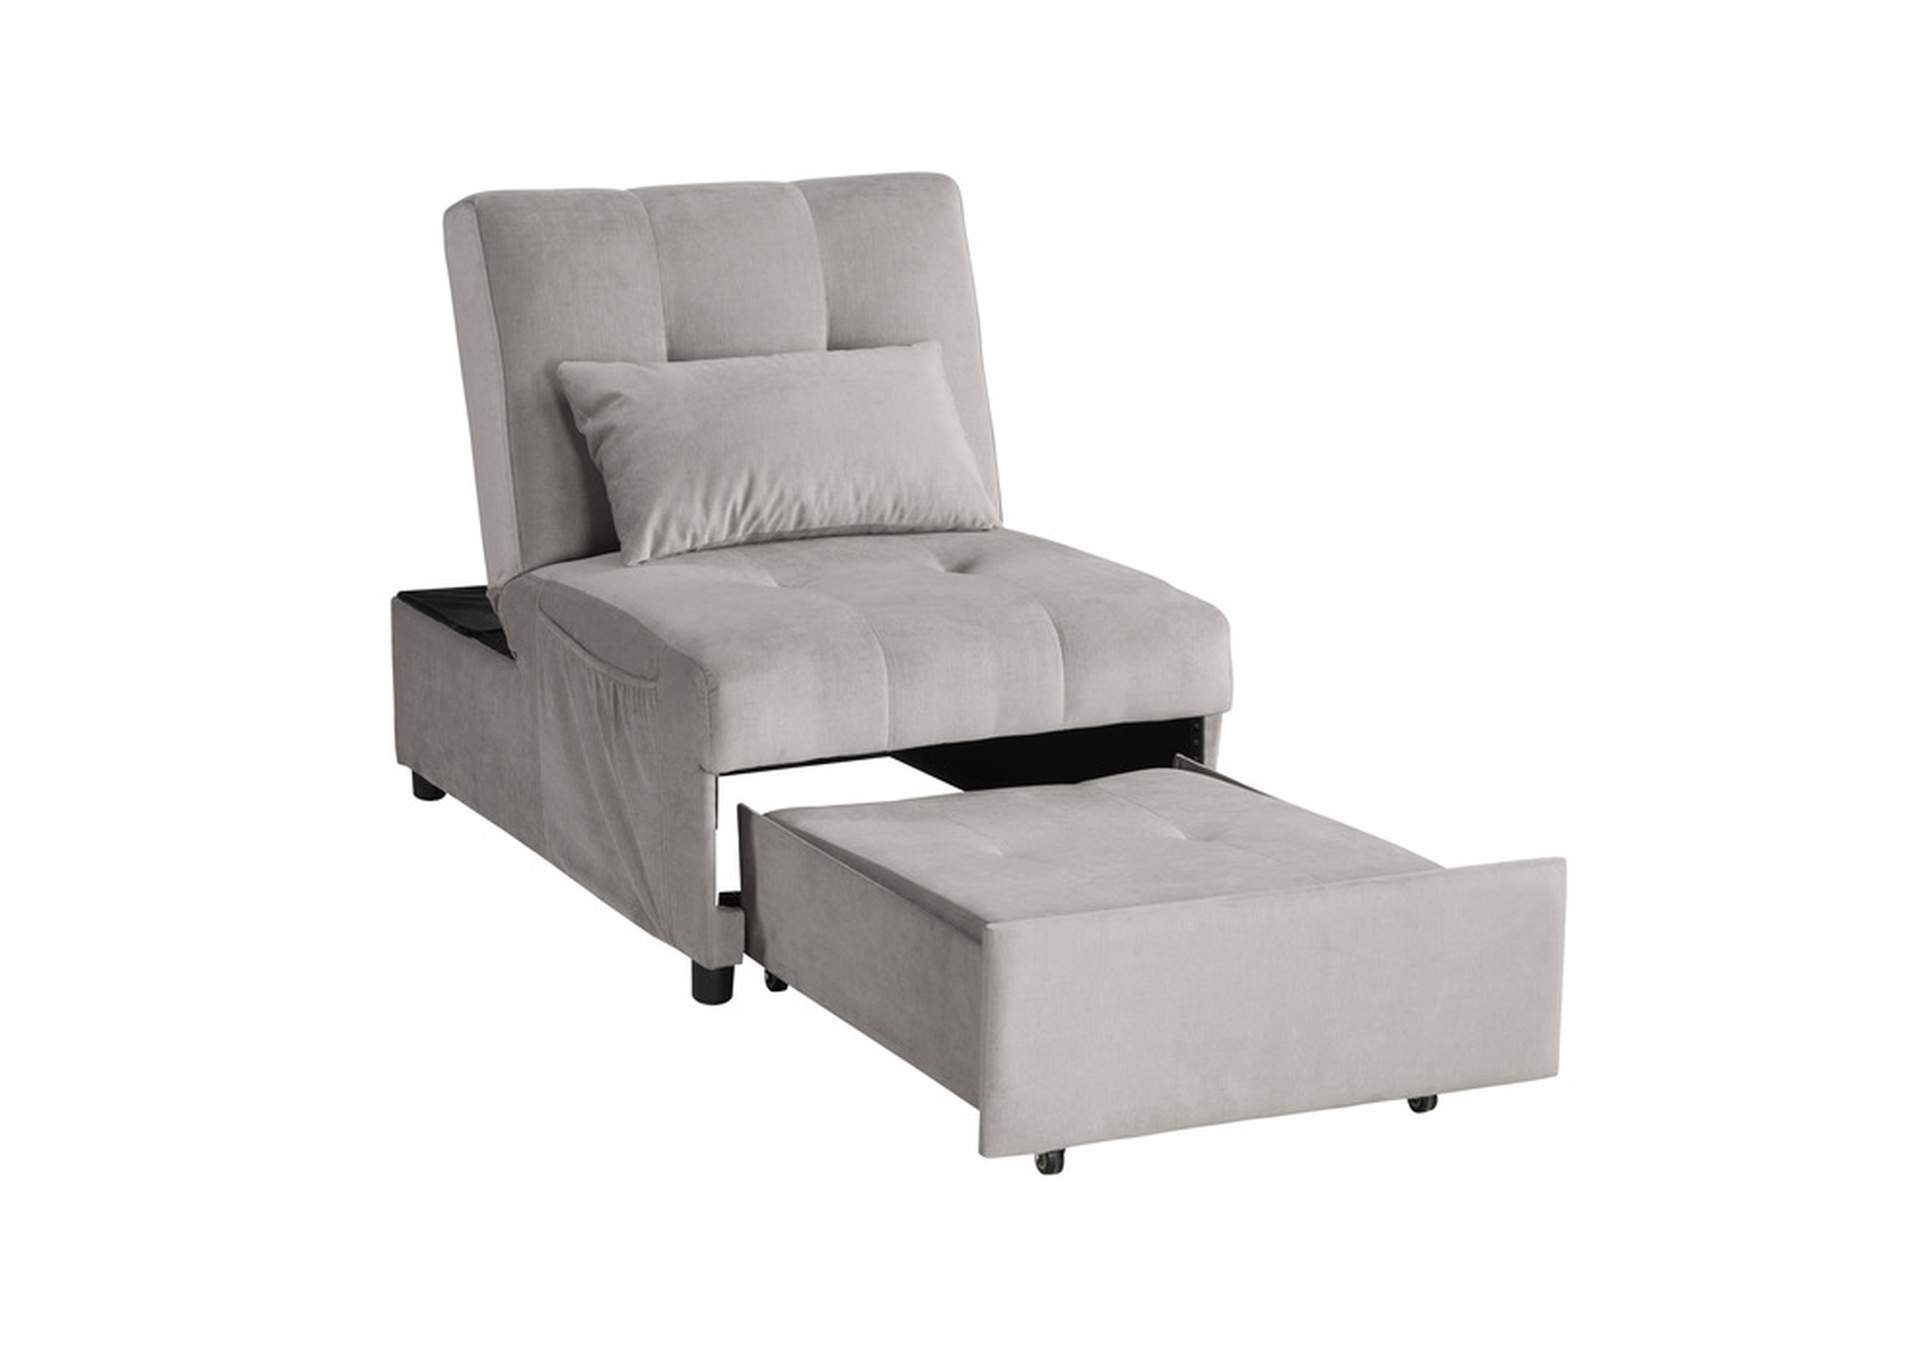 Garrell Lift Top Storage Bench with Pull-out Bed,Homelegance